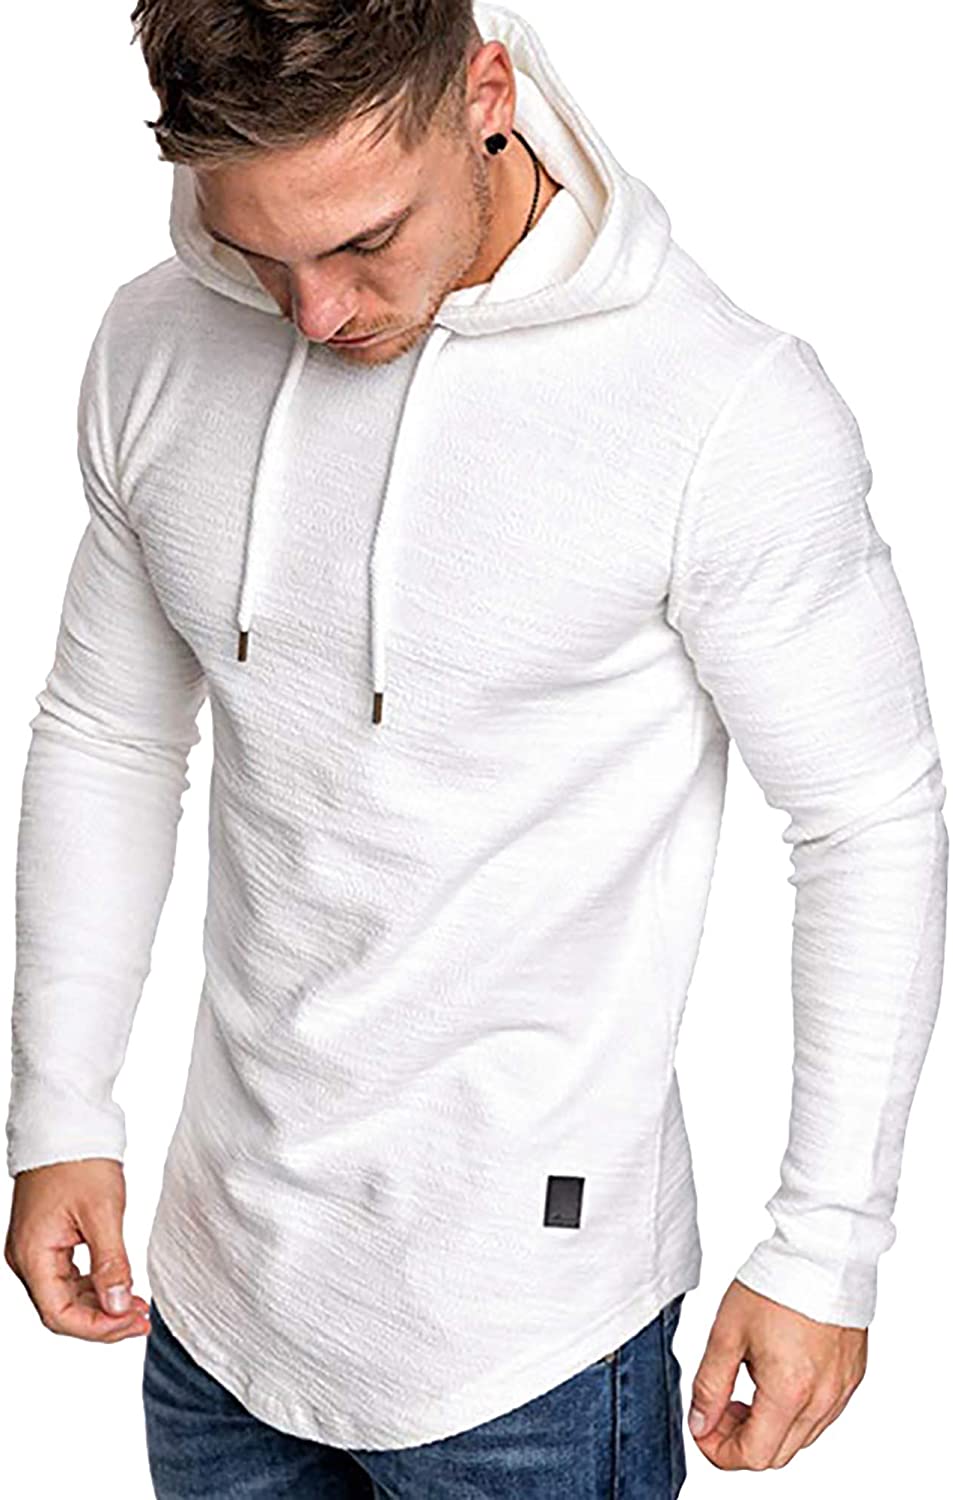 Lexiart Mens Fashion Athletic Shirts Casual Solid Color T-Shirt Slim Fit Sport Tops 